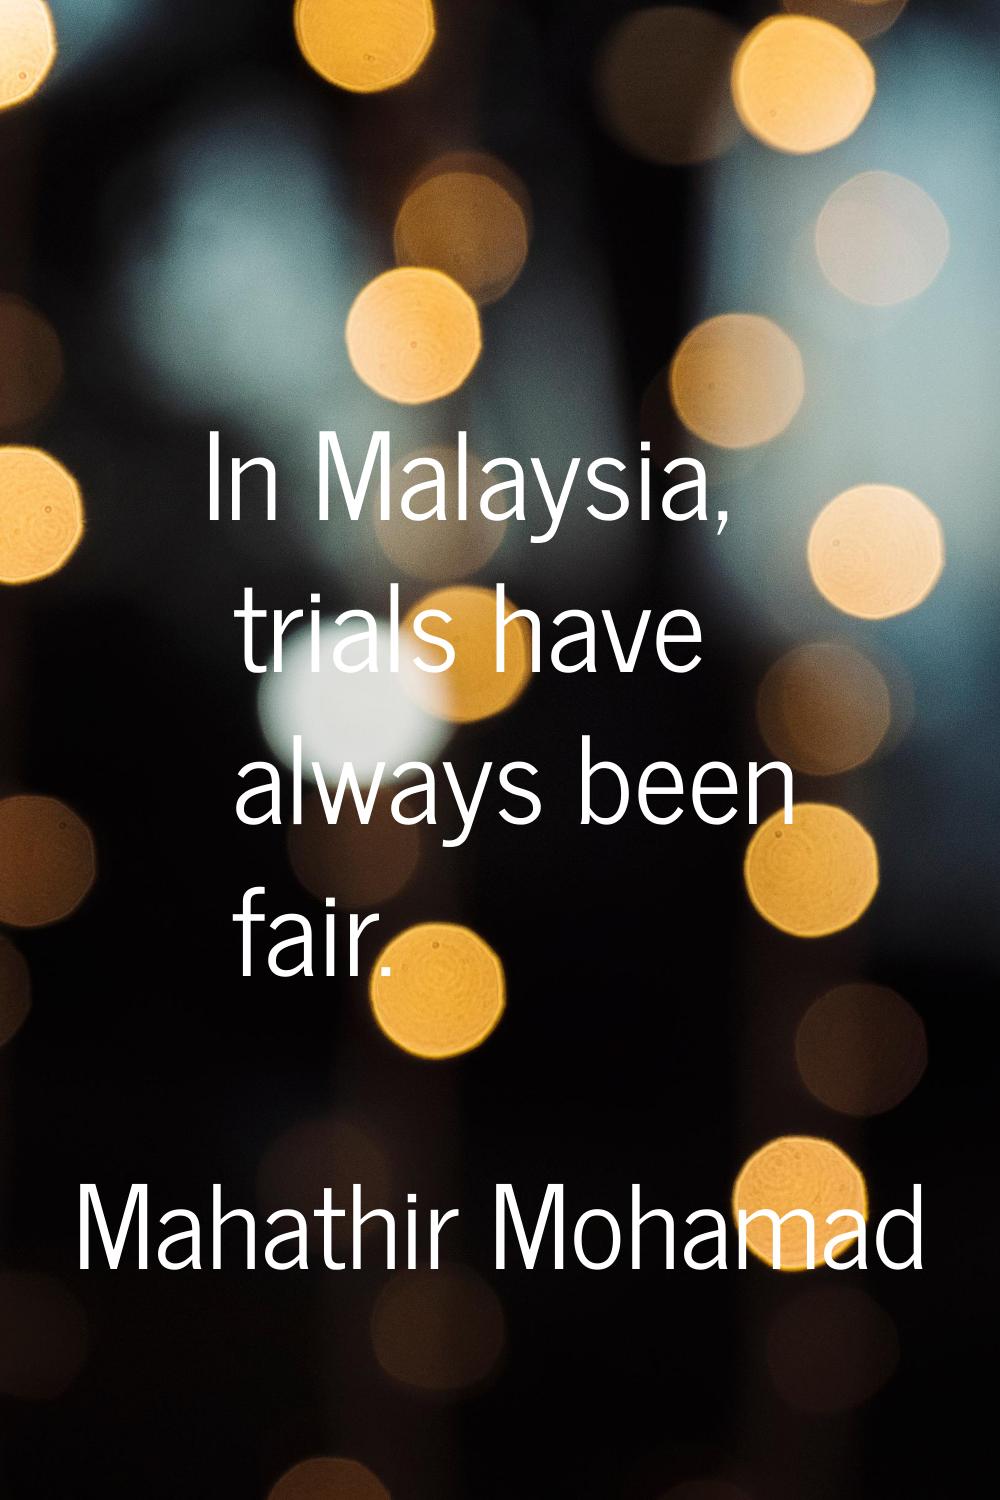 In Malaysia, trials have always been fair.